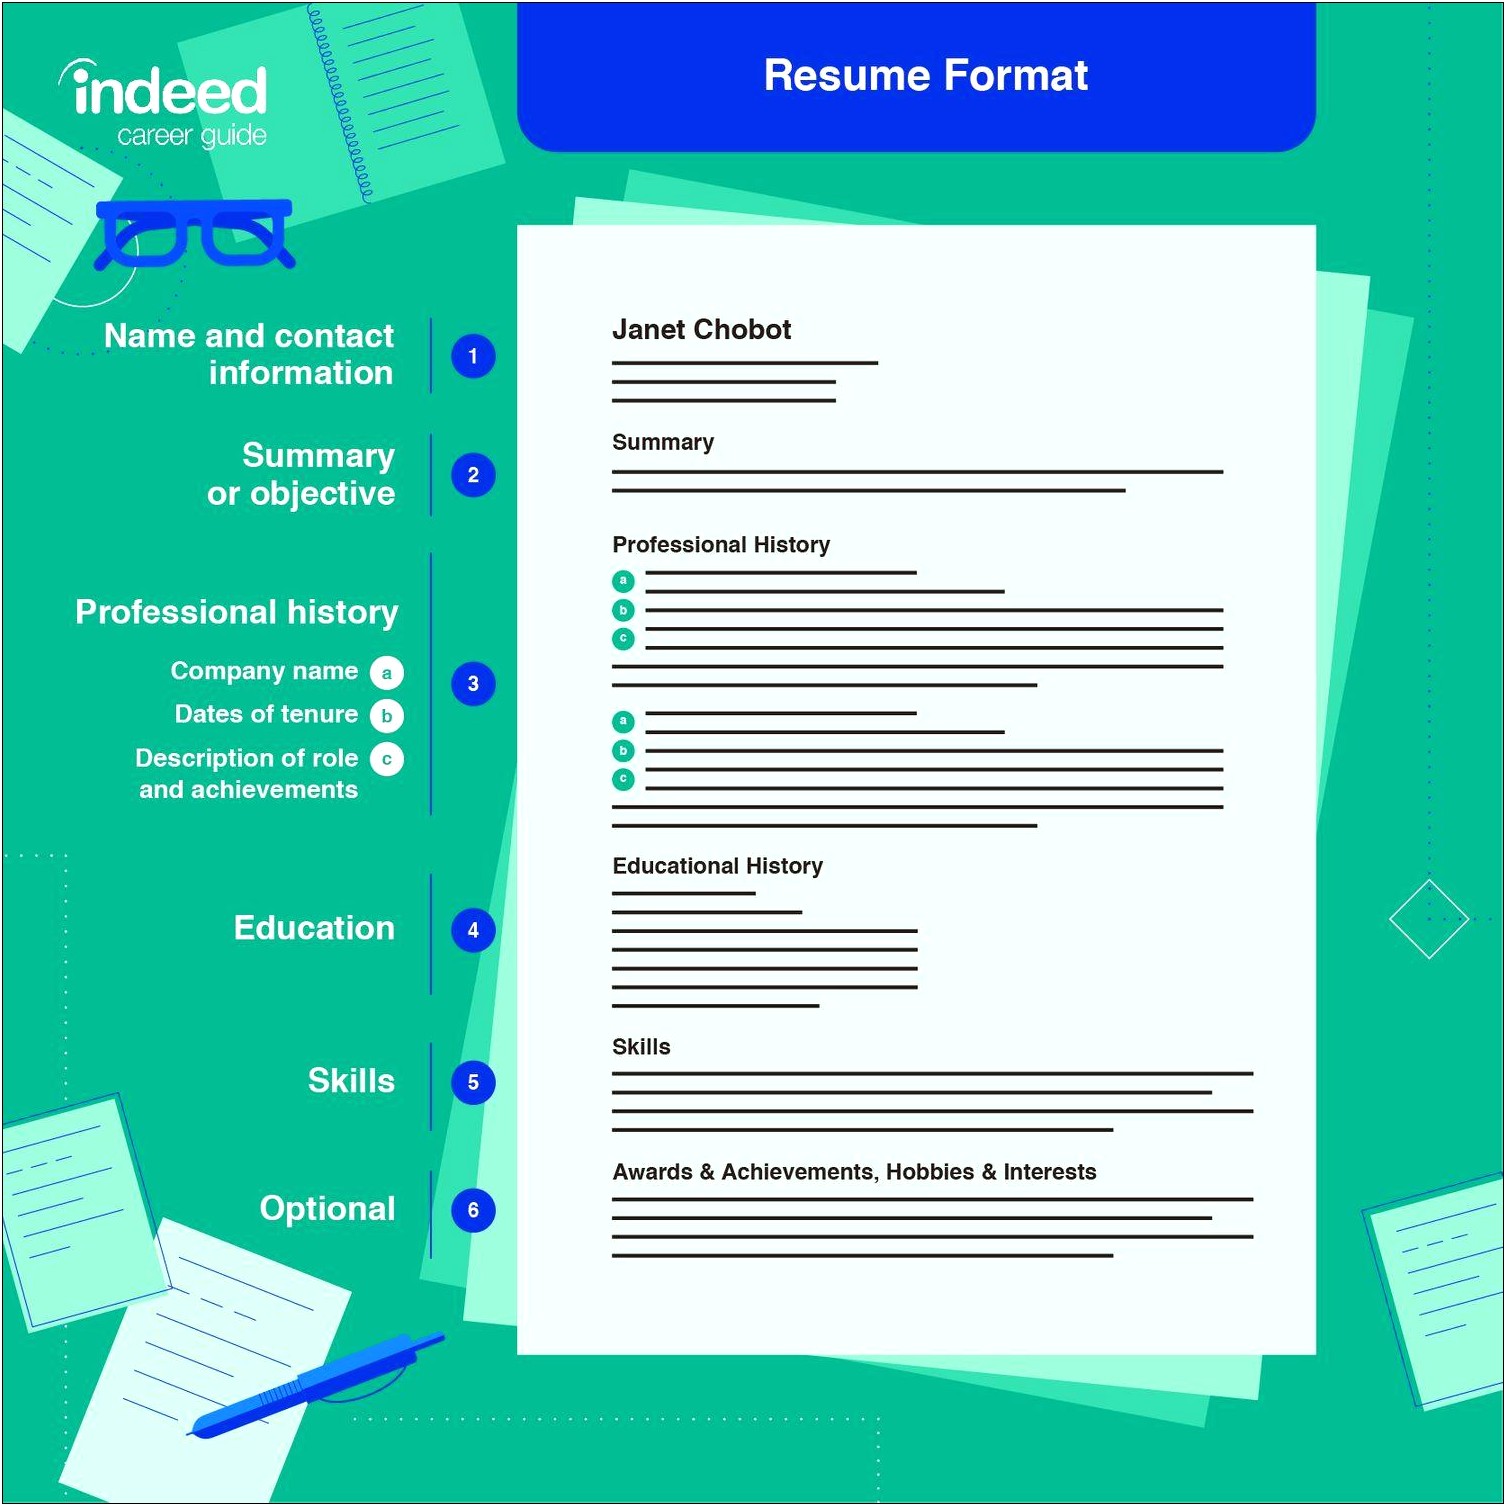 Food Industry Resume Objective Examples